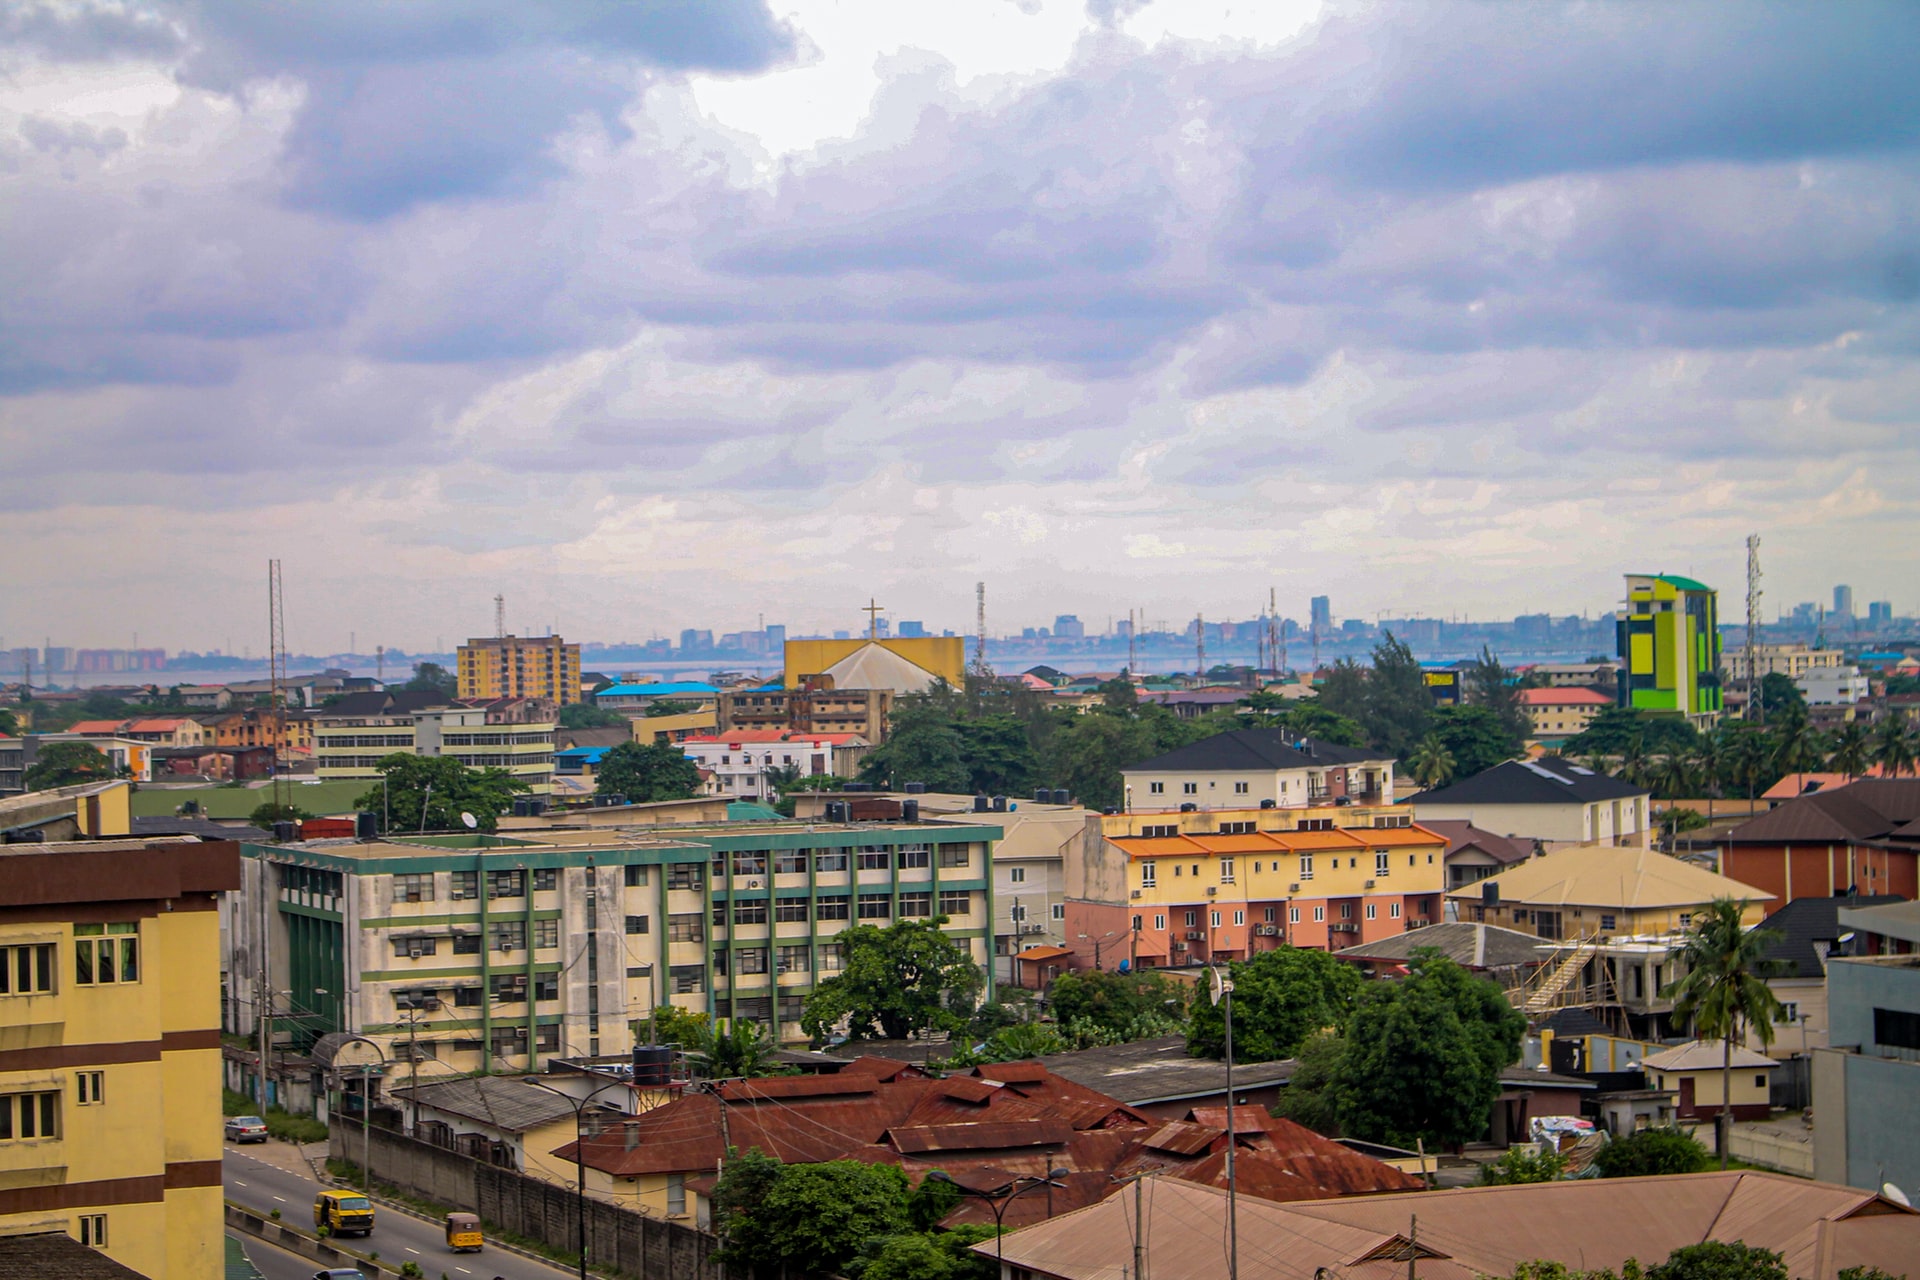 Aerial view of the Lagos Landscape